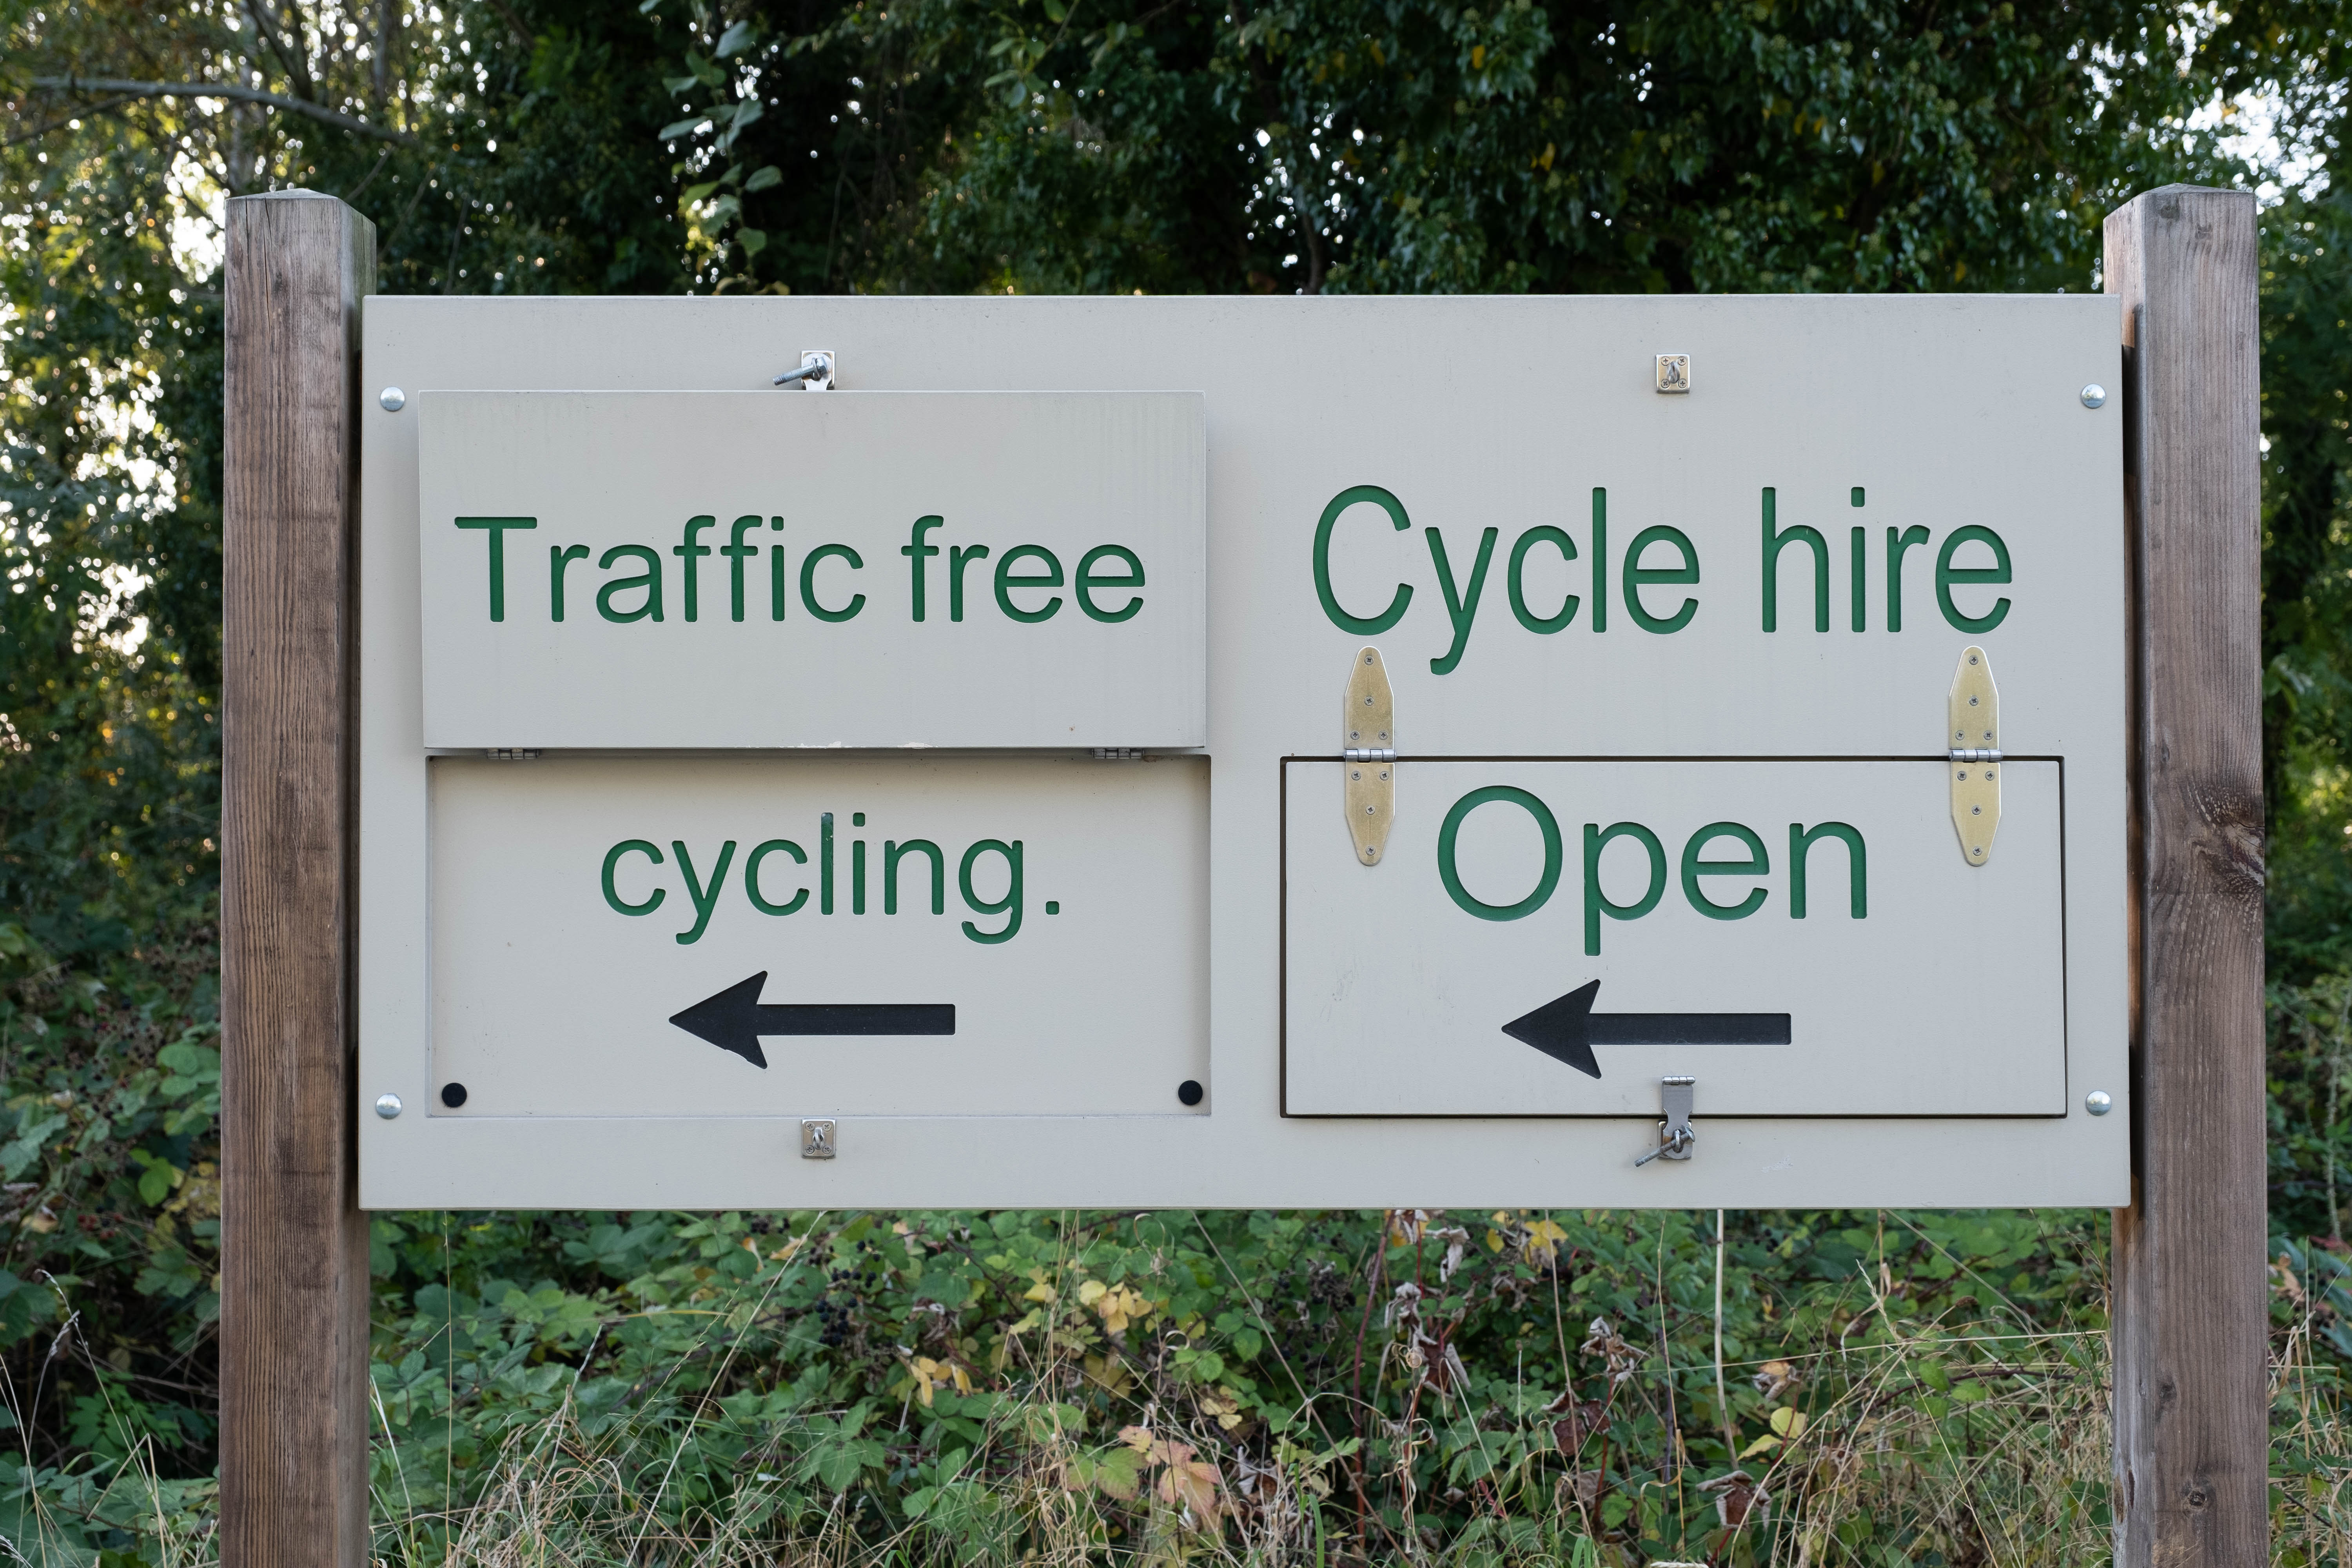 A sign at Stratford Green way shows that traffic free cycling is available and that cycle hire is open